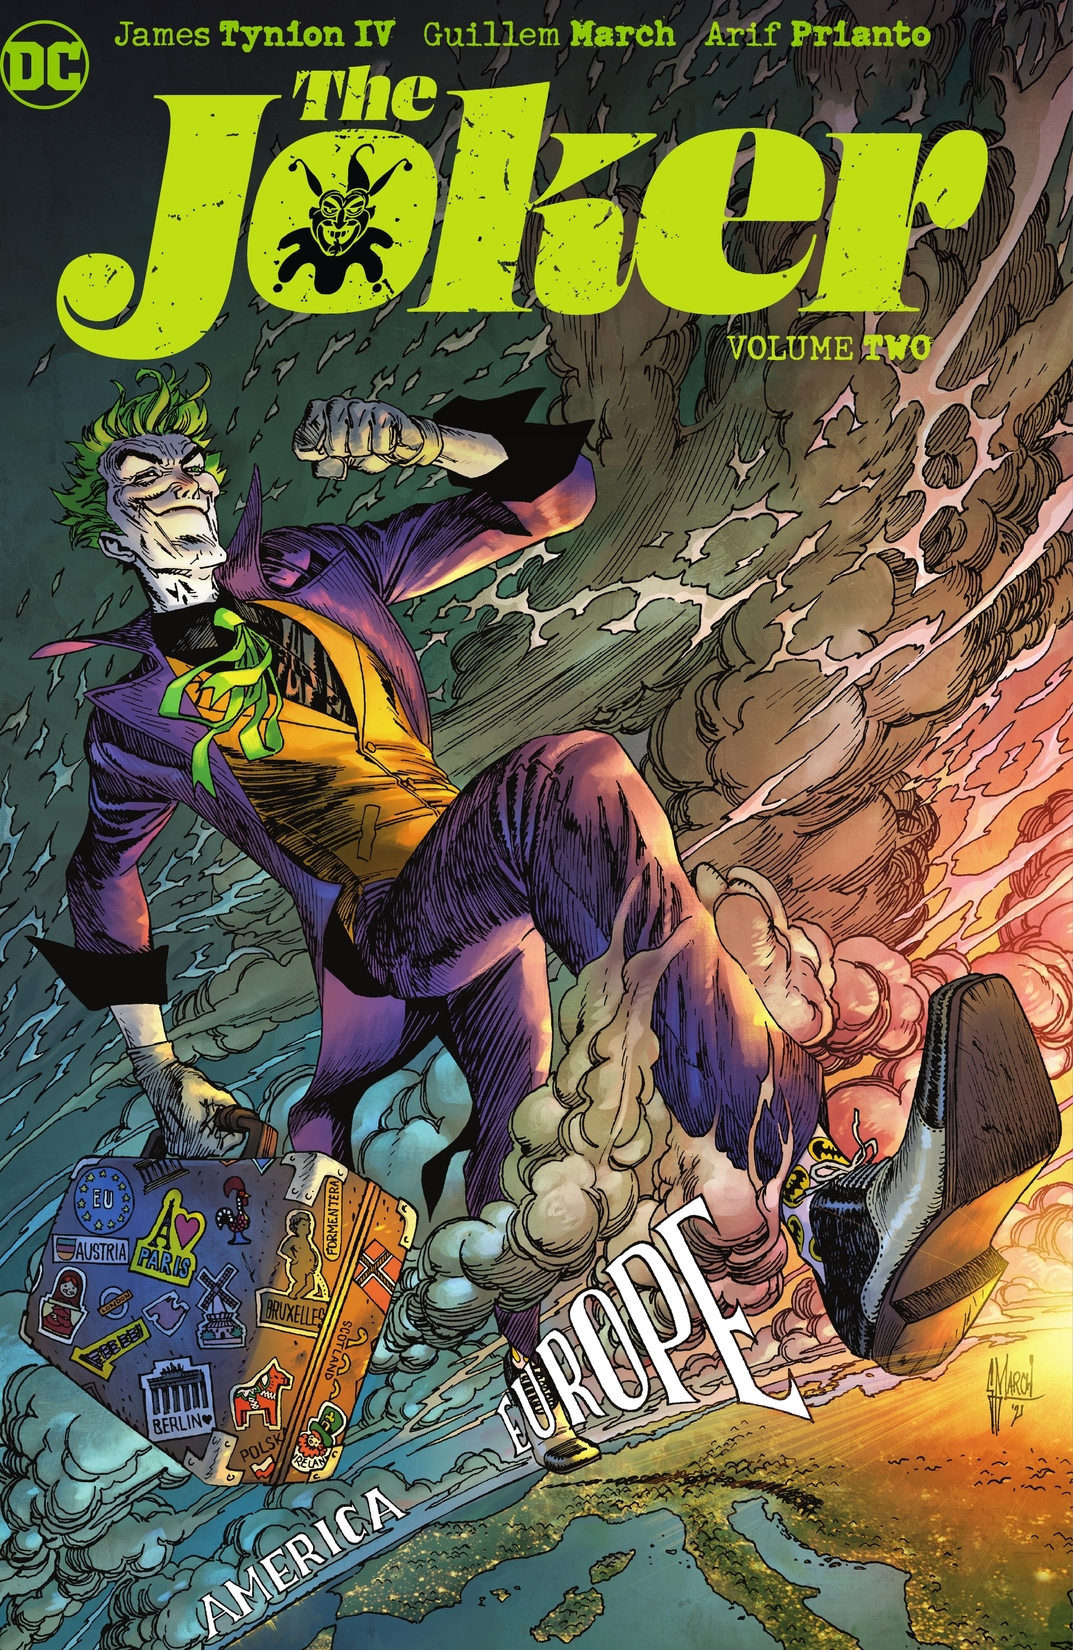 The Joker Vol. 2 preview images